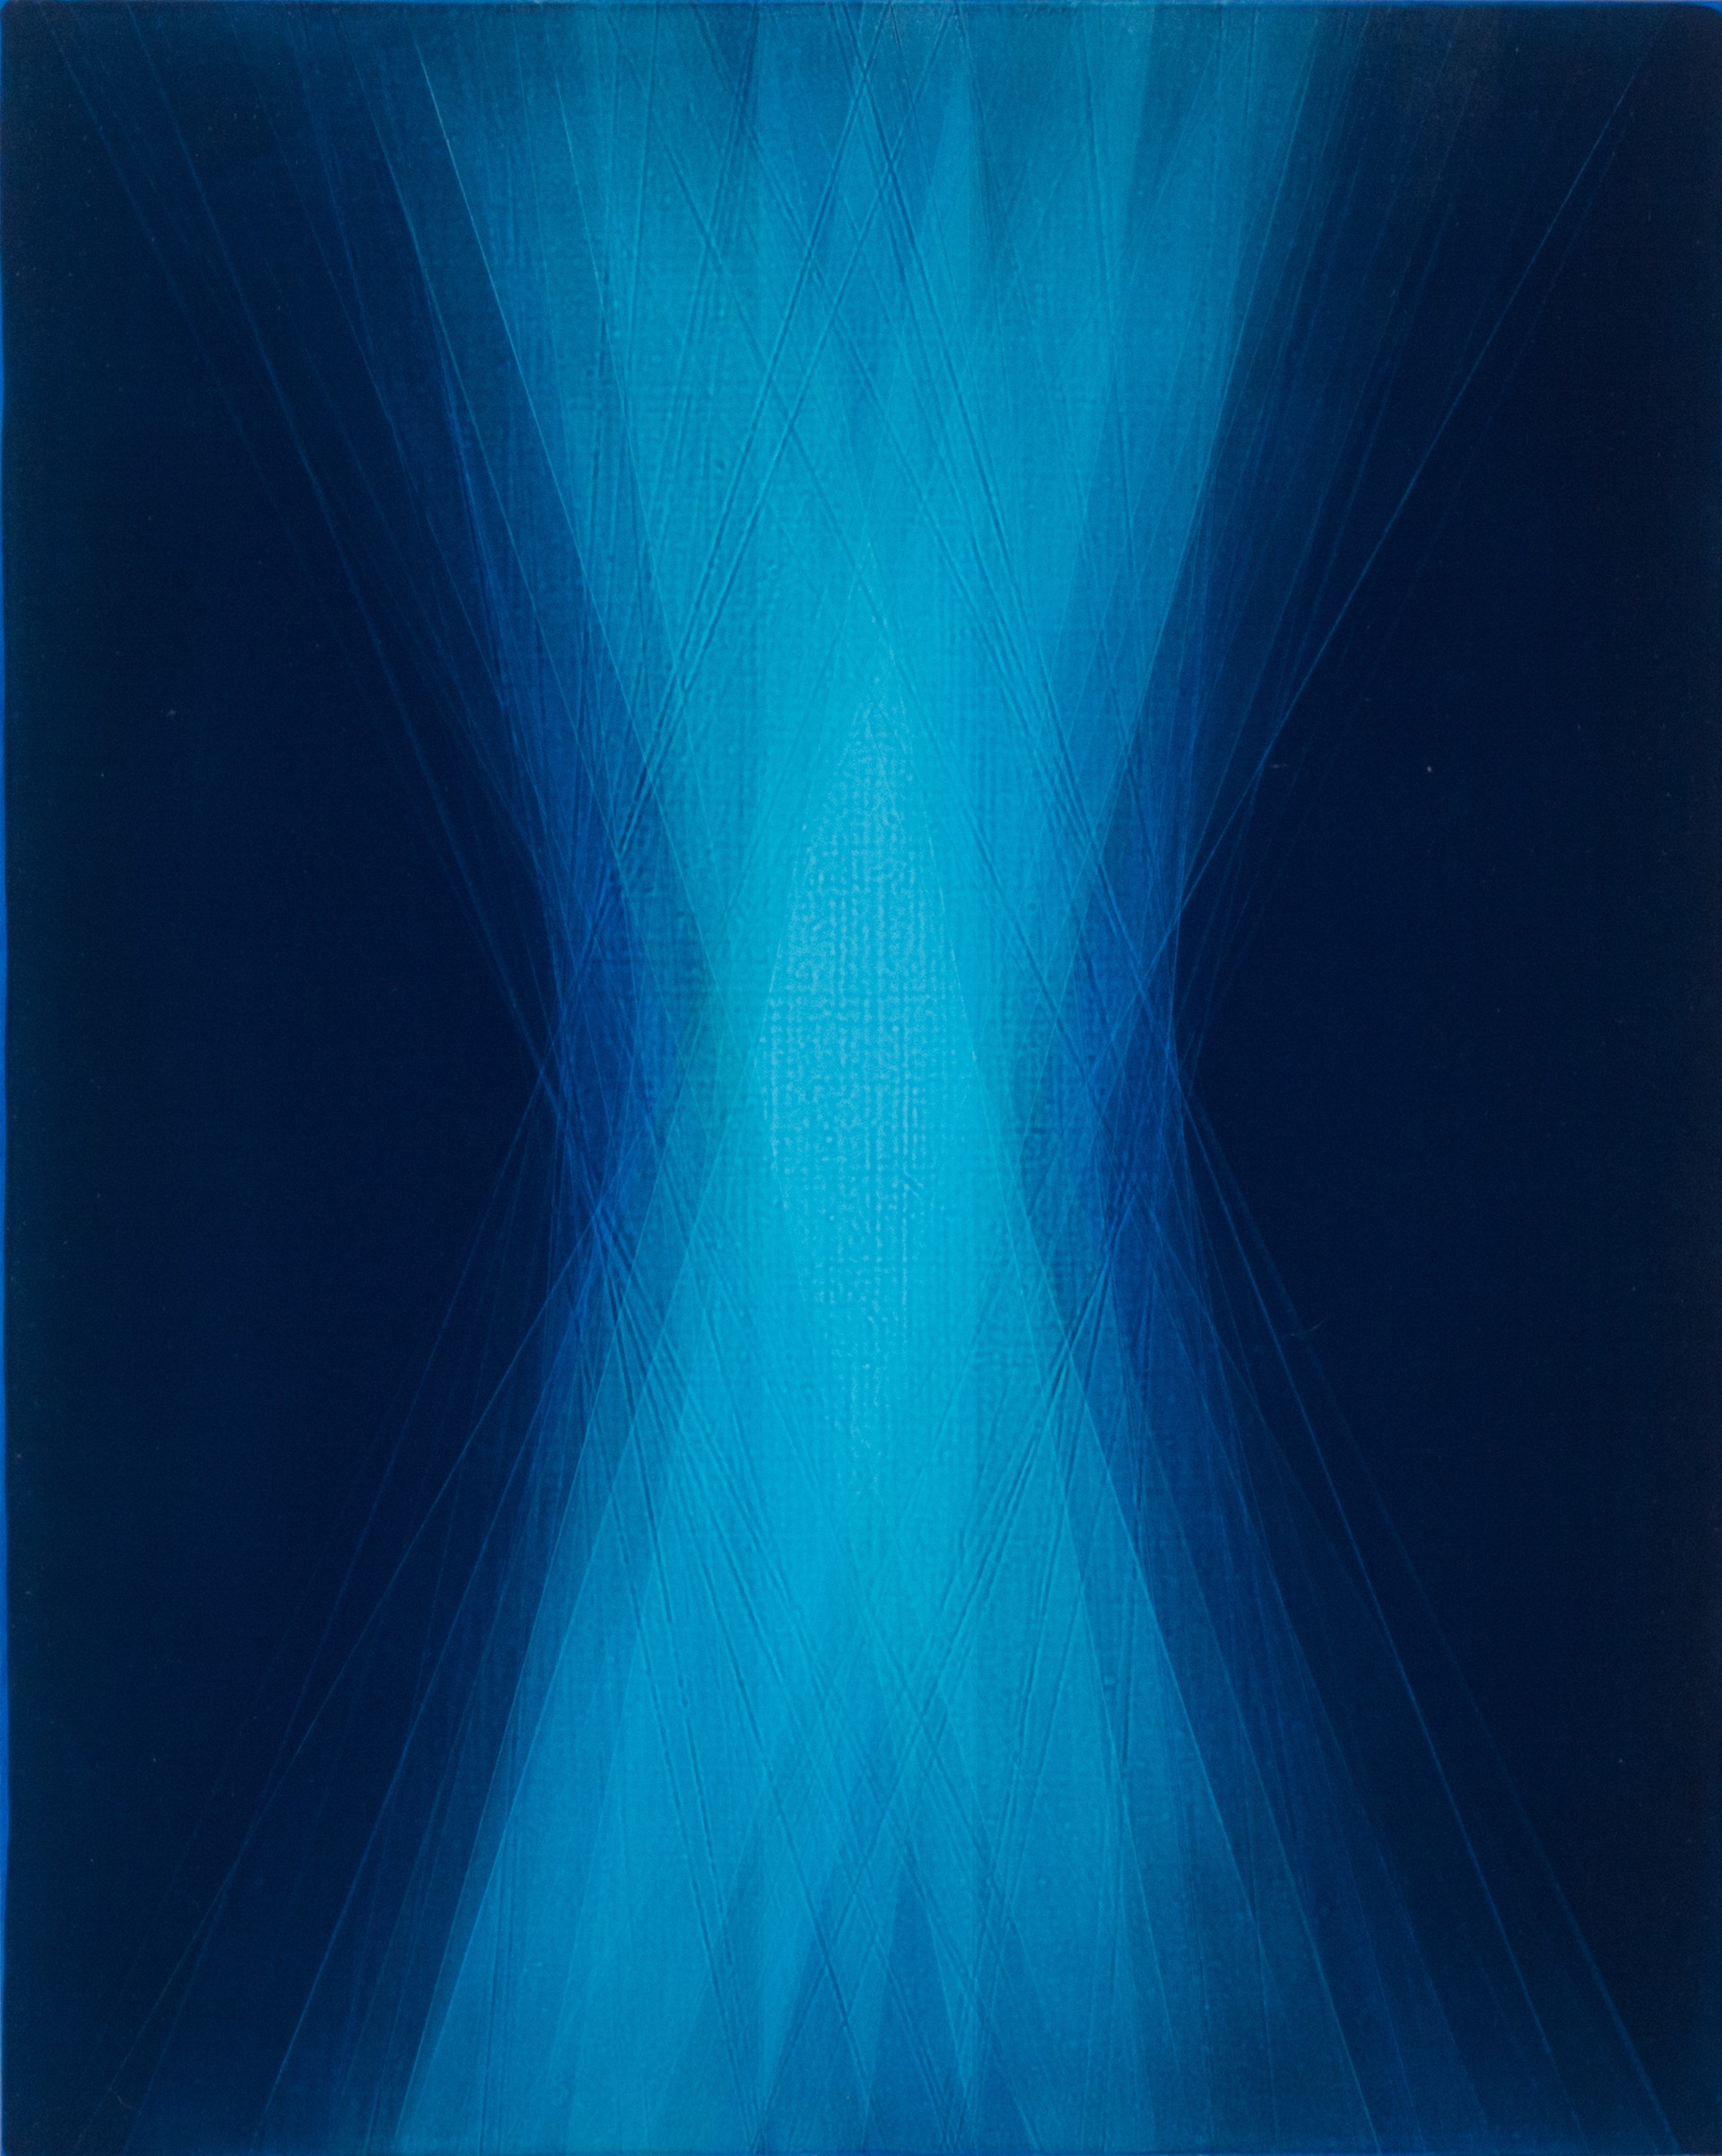 Spaces in Between (Phthalo Blue) by Bernadette Jiyong Frank